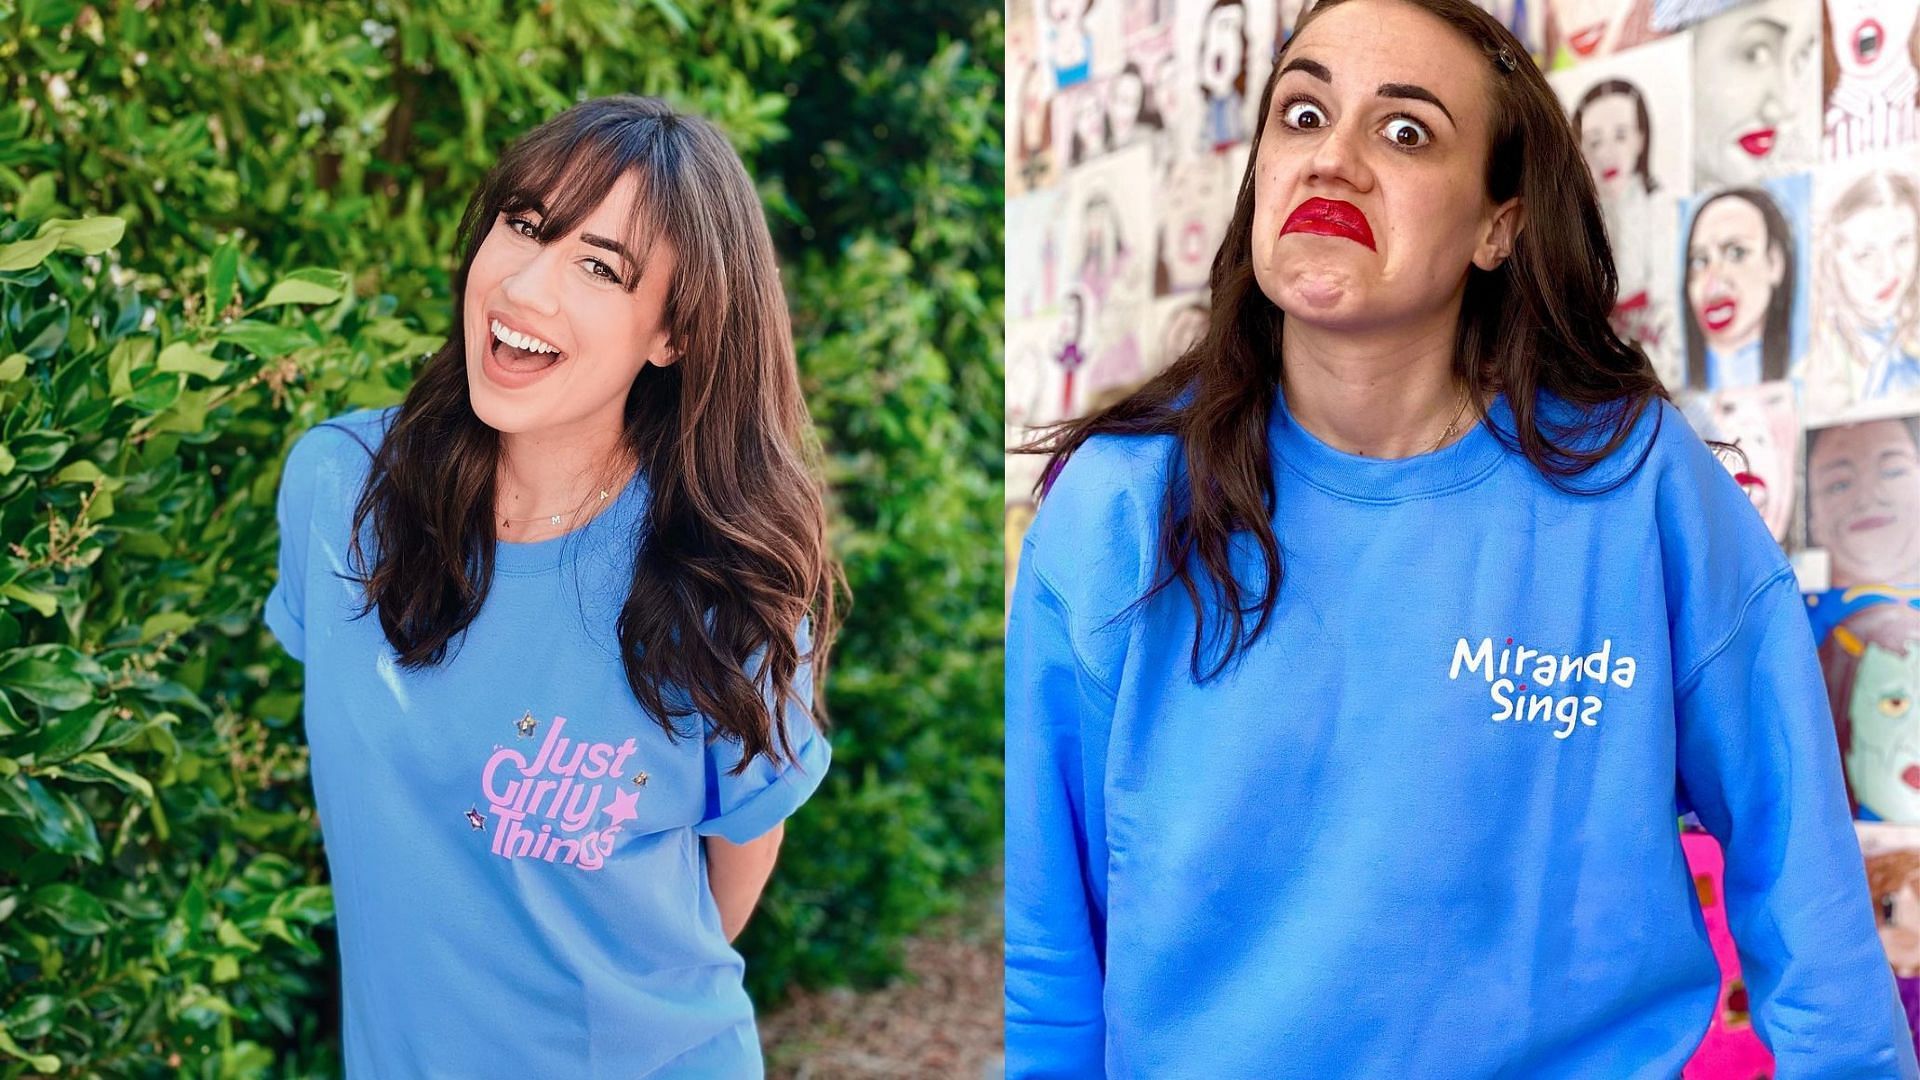 Miranda Sings to appear on Episode 3 of Generation Gap airing on July 21 (Image colleen/Instagram)